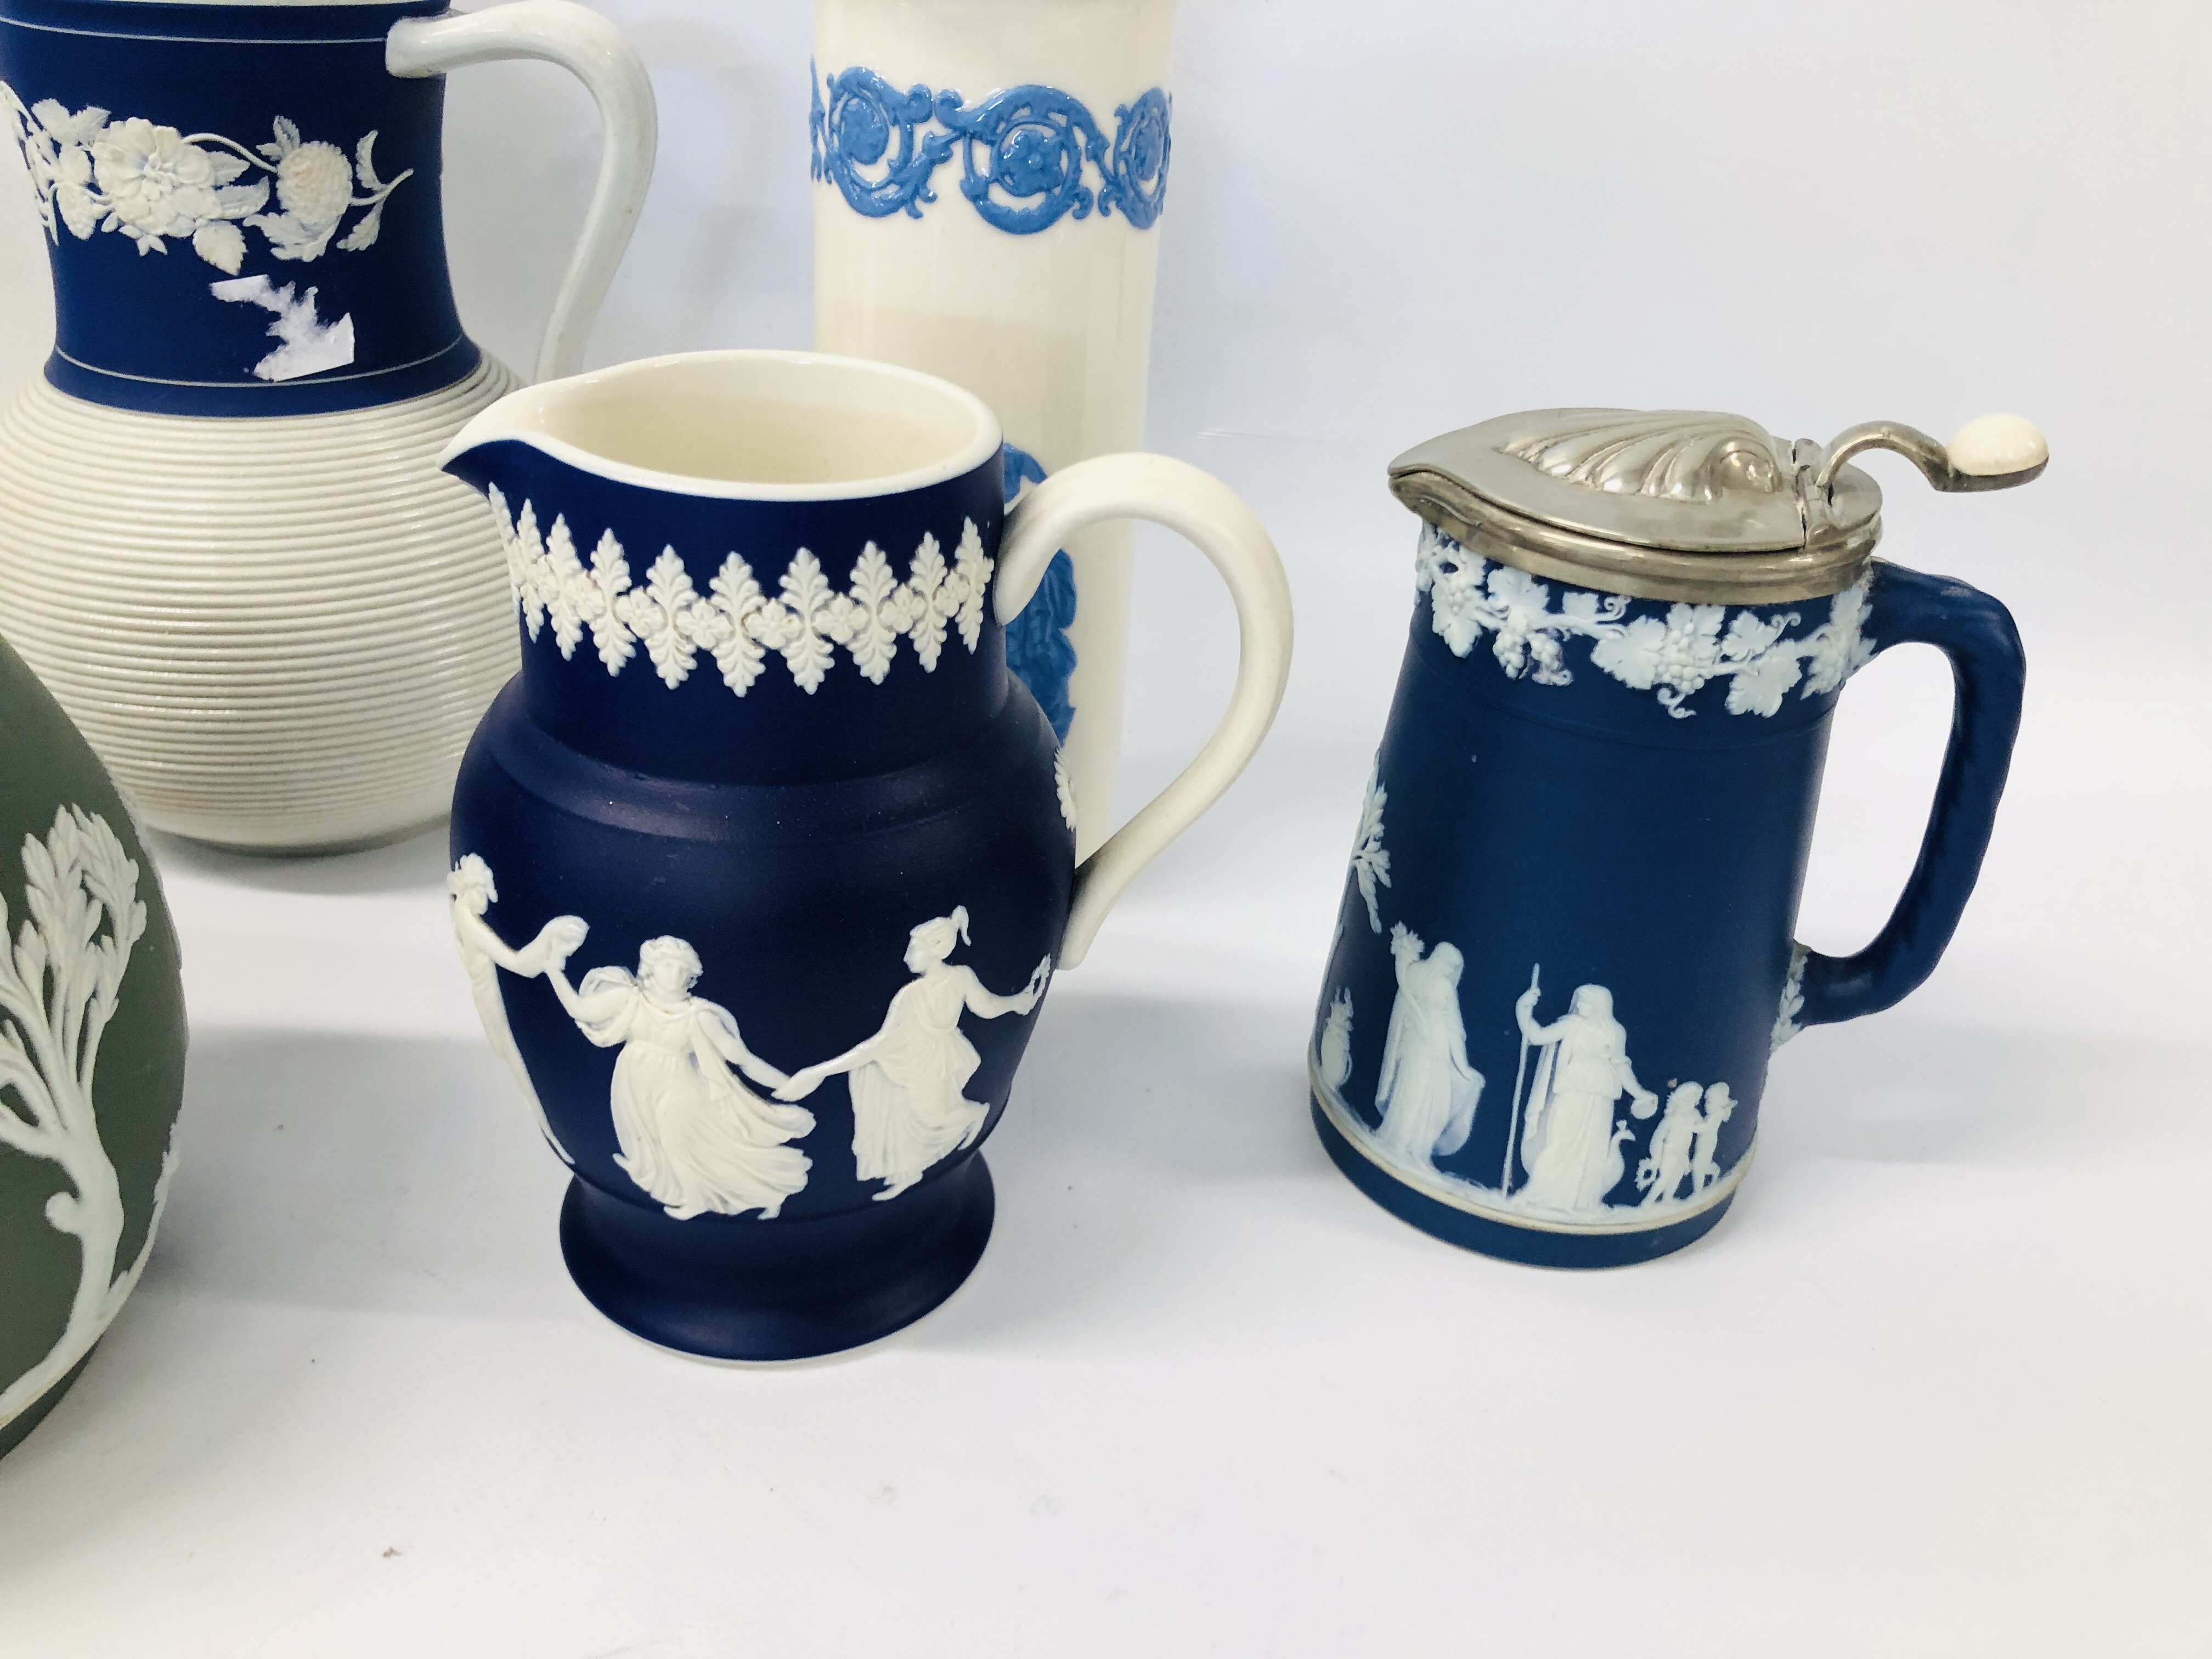 COLLECTION OF VINTAGE JASPERWARE AND WEDGWOOD ITEMS TO INCLUDE BISCUIT BARRELS, JUGS ETC. - Image 2 of 5